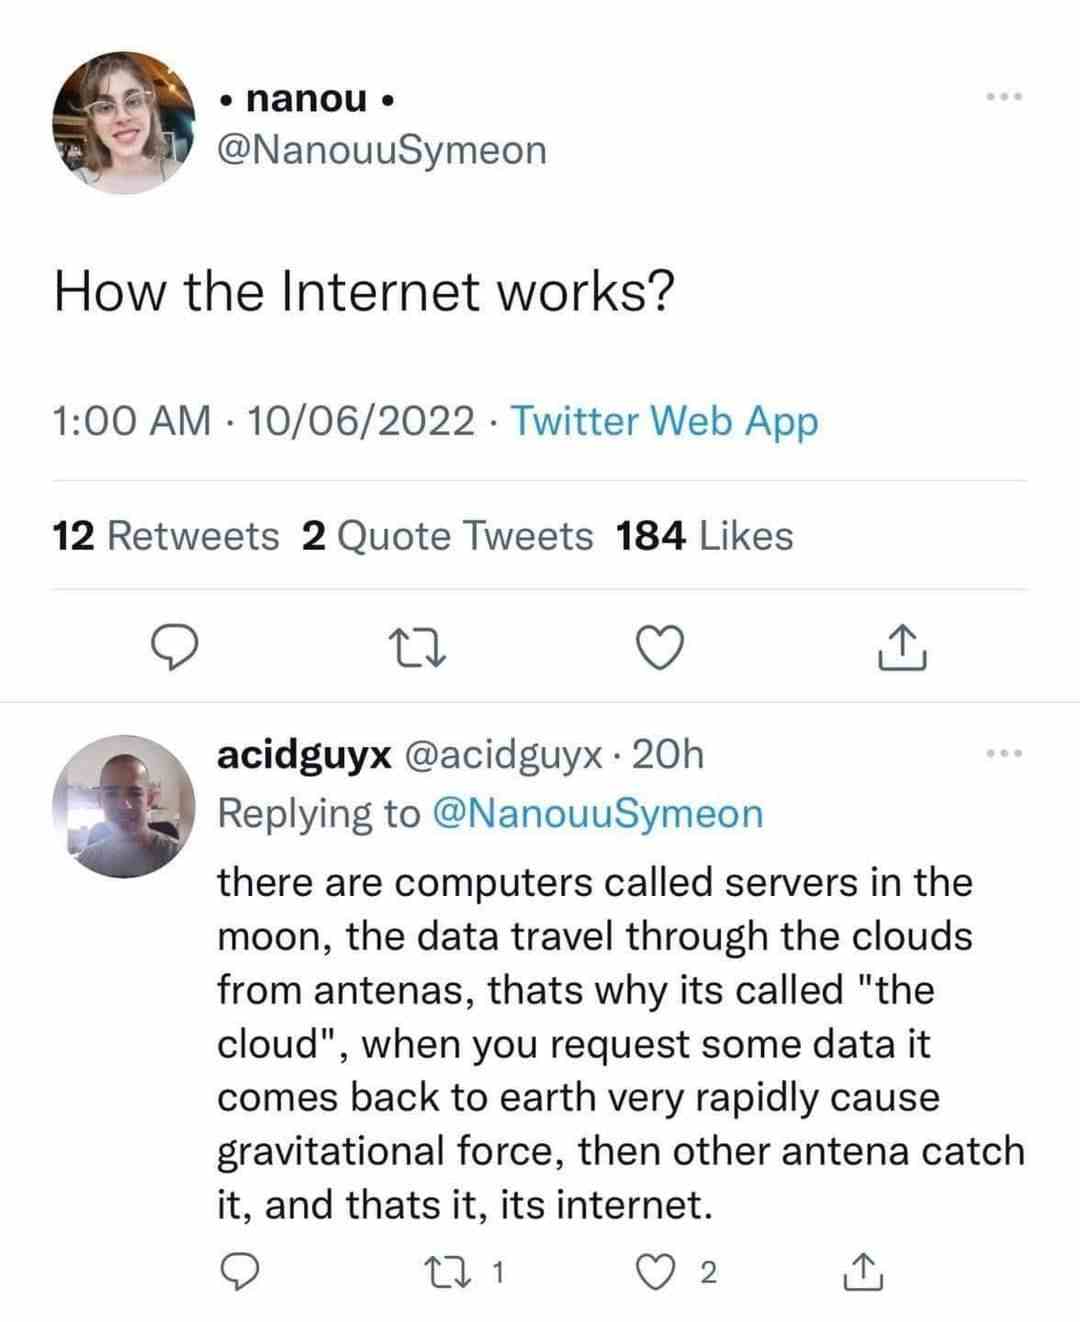 How the Internet works?